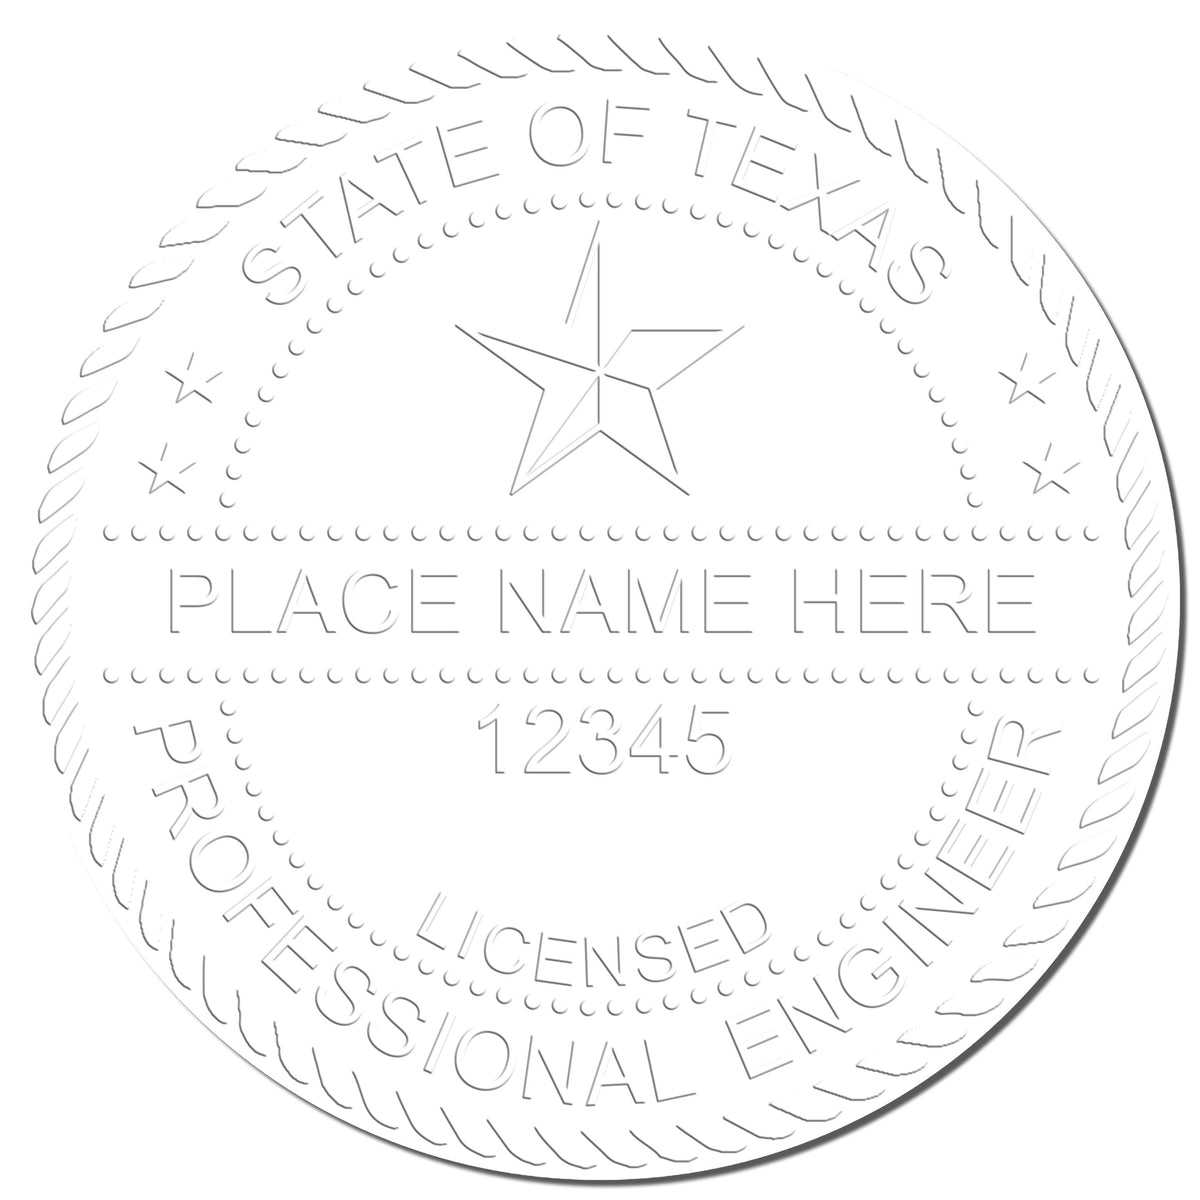 This paper is stamped with a sample imprint of the Gift Texas Engineer Seal, signifying its quality and reliability.